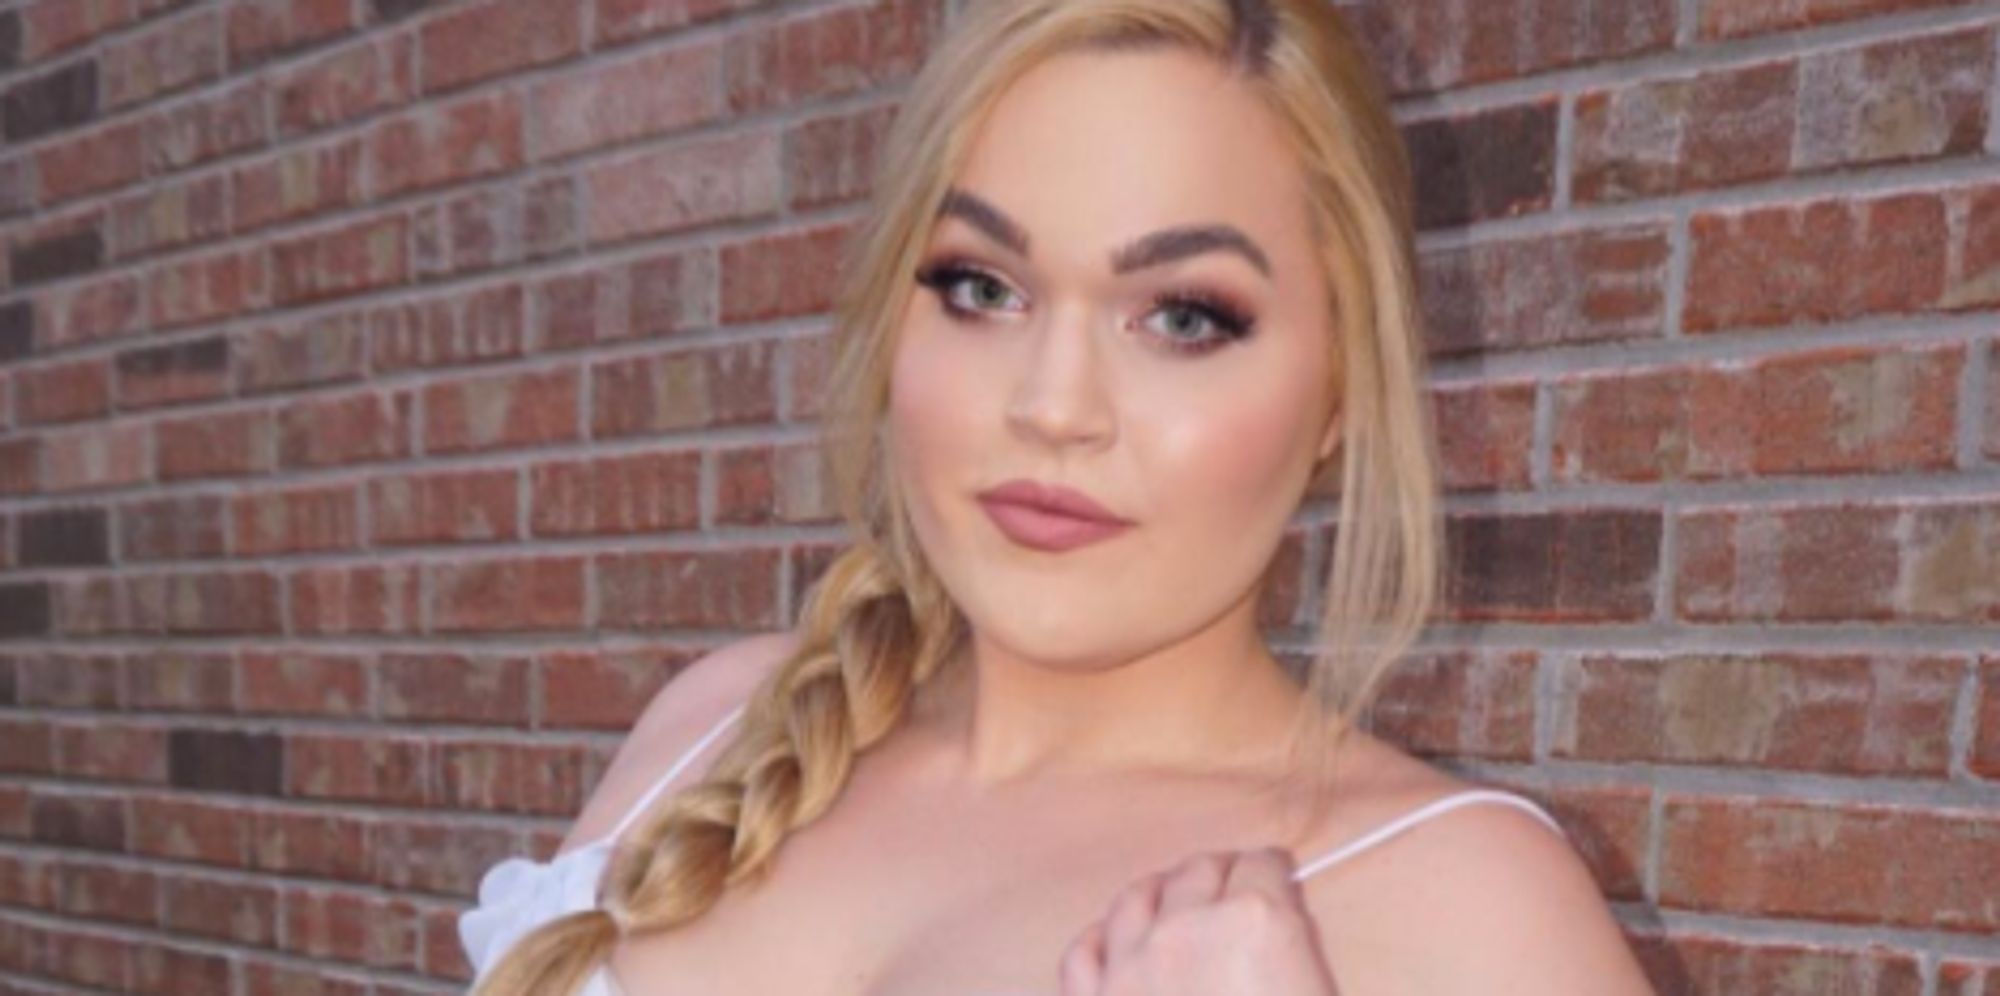 Fashion Vlogger Loey Lane Epically Schools Body Shamers With Her Fat